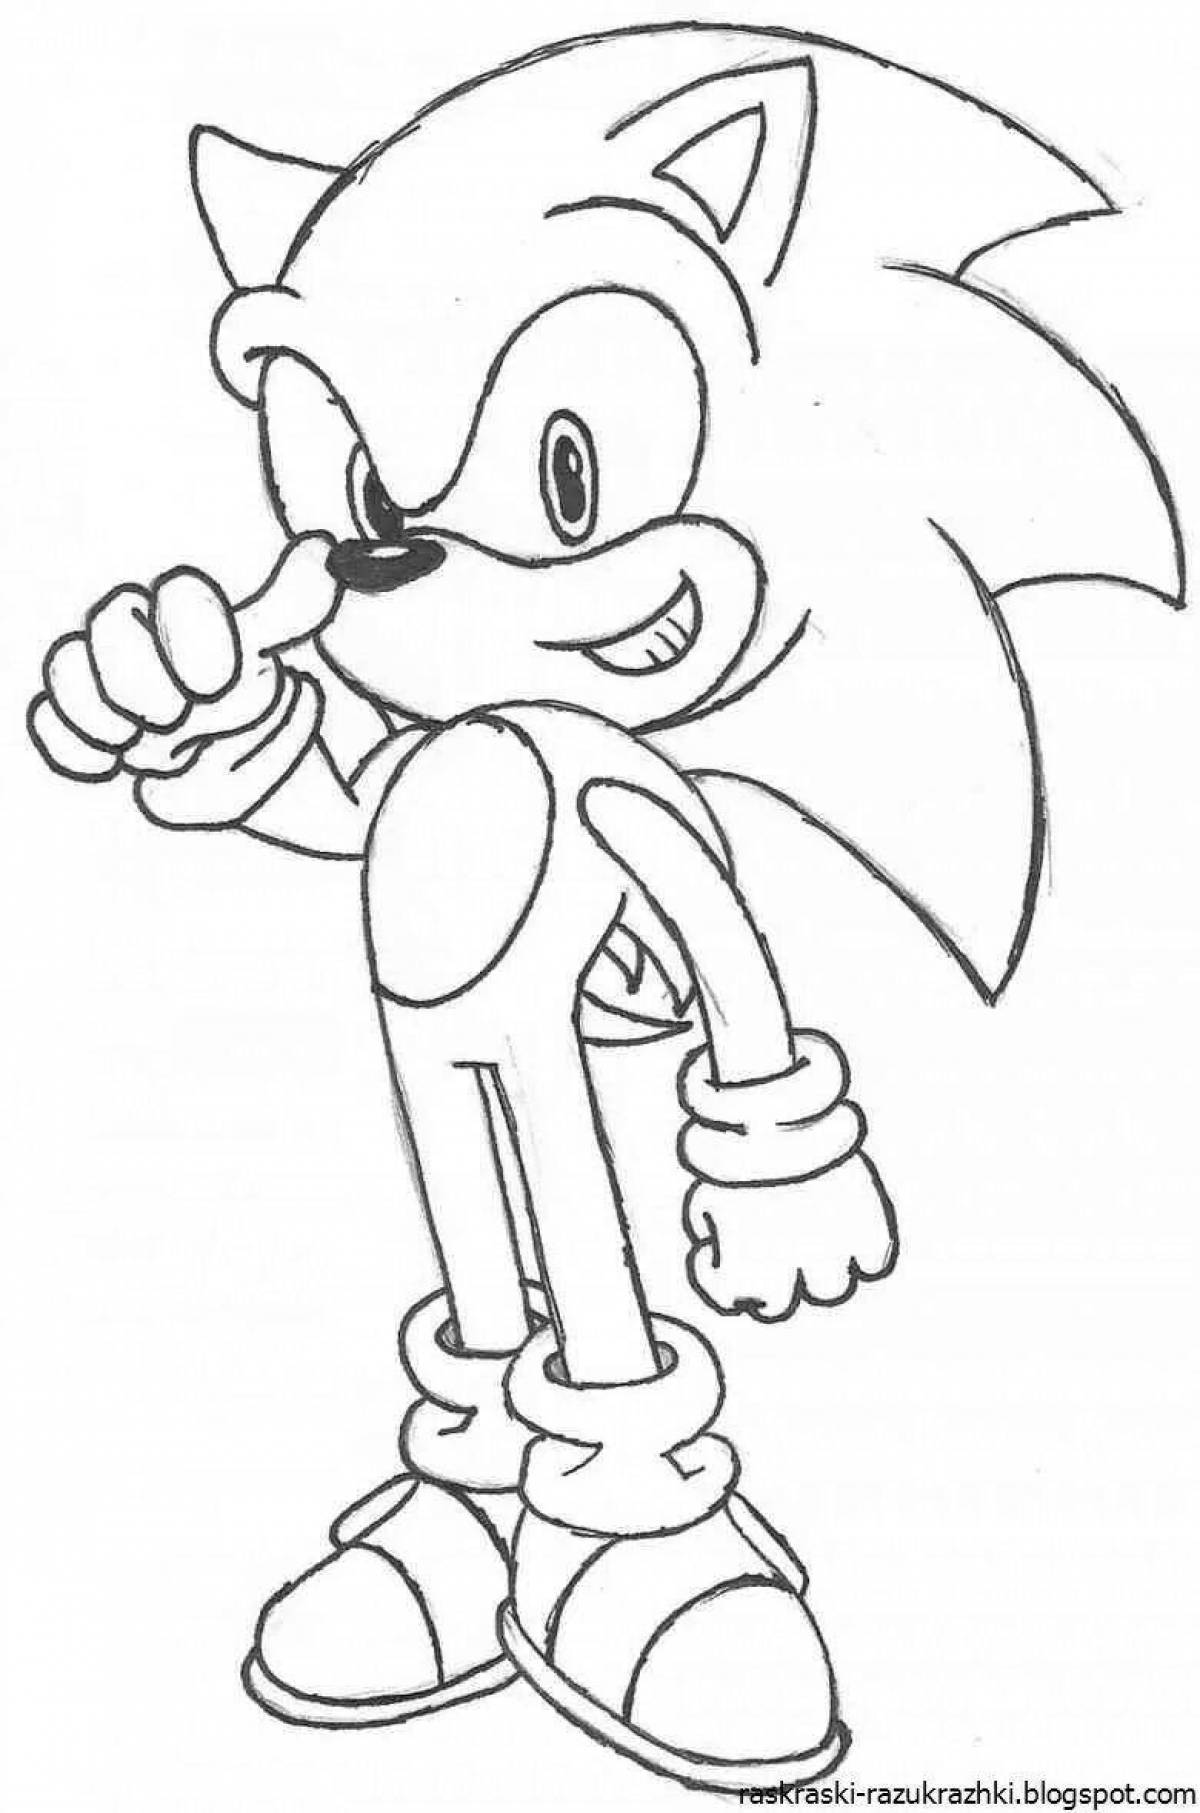 Splendid baby sonic coloring page